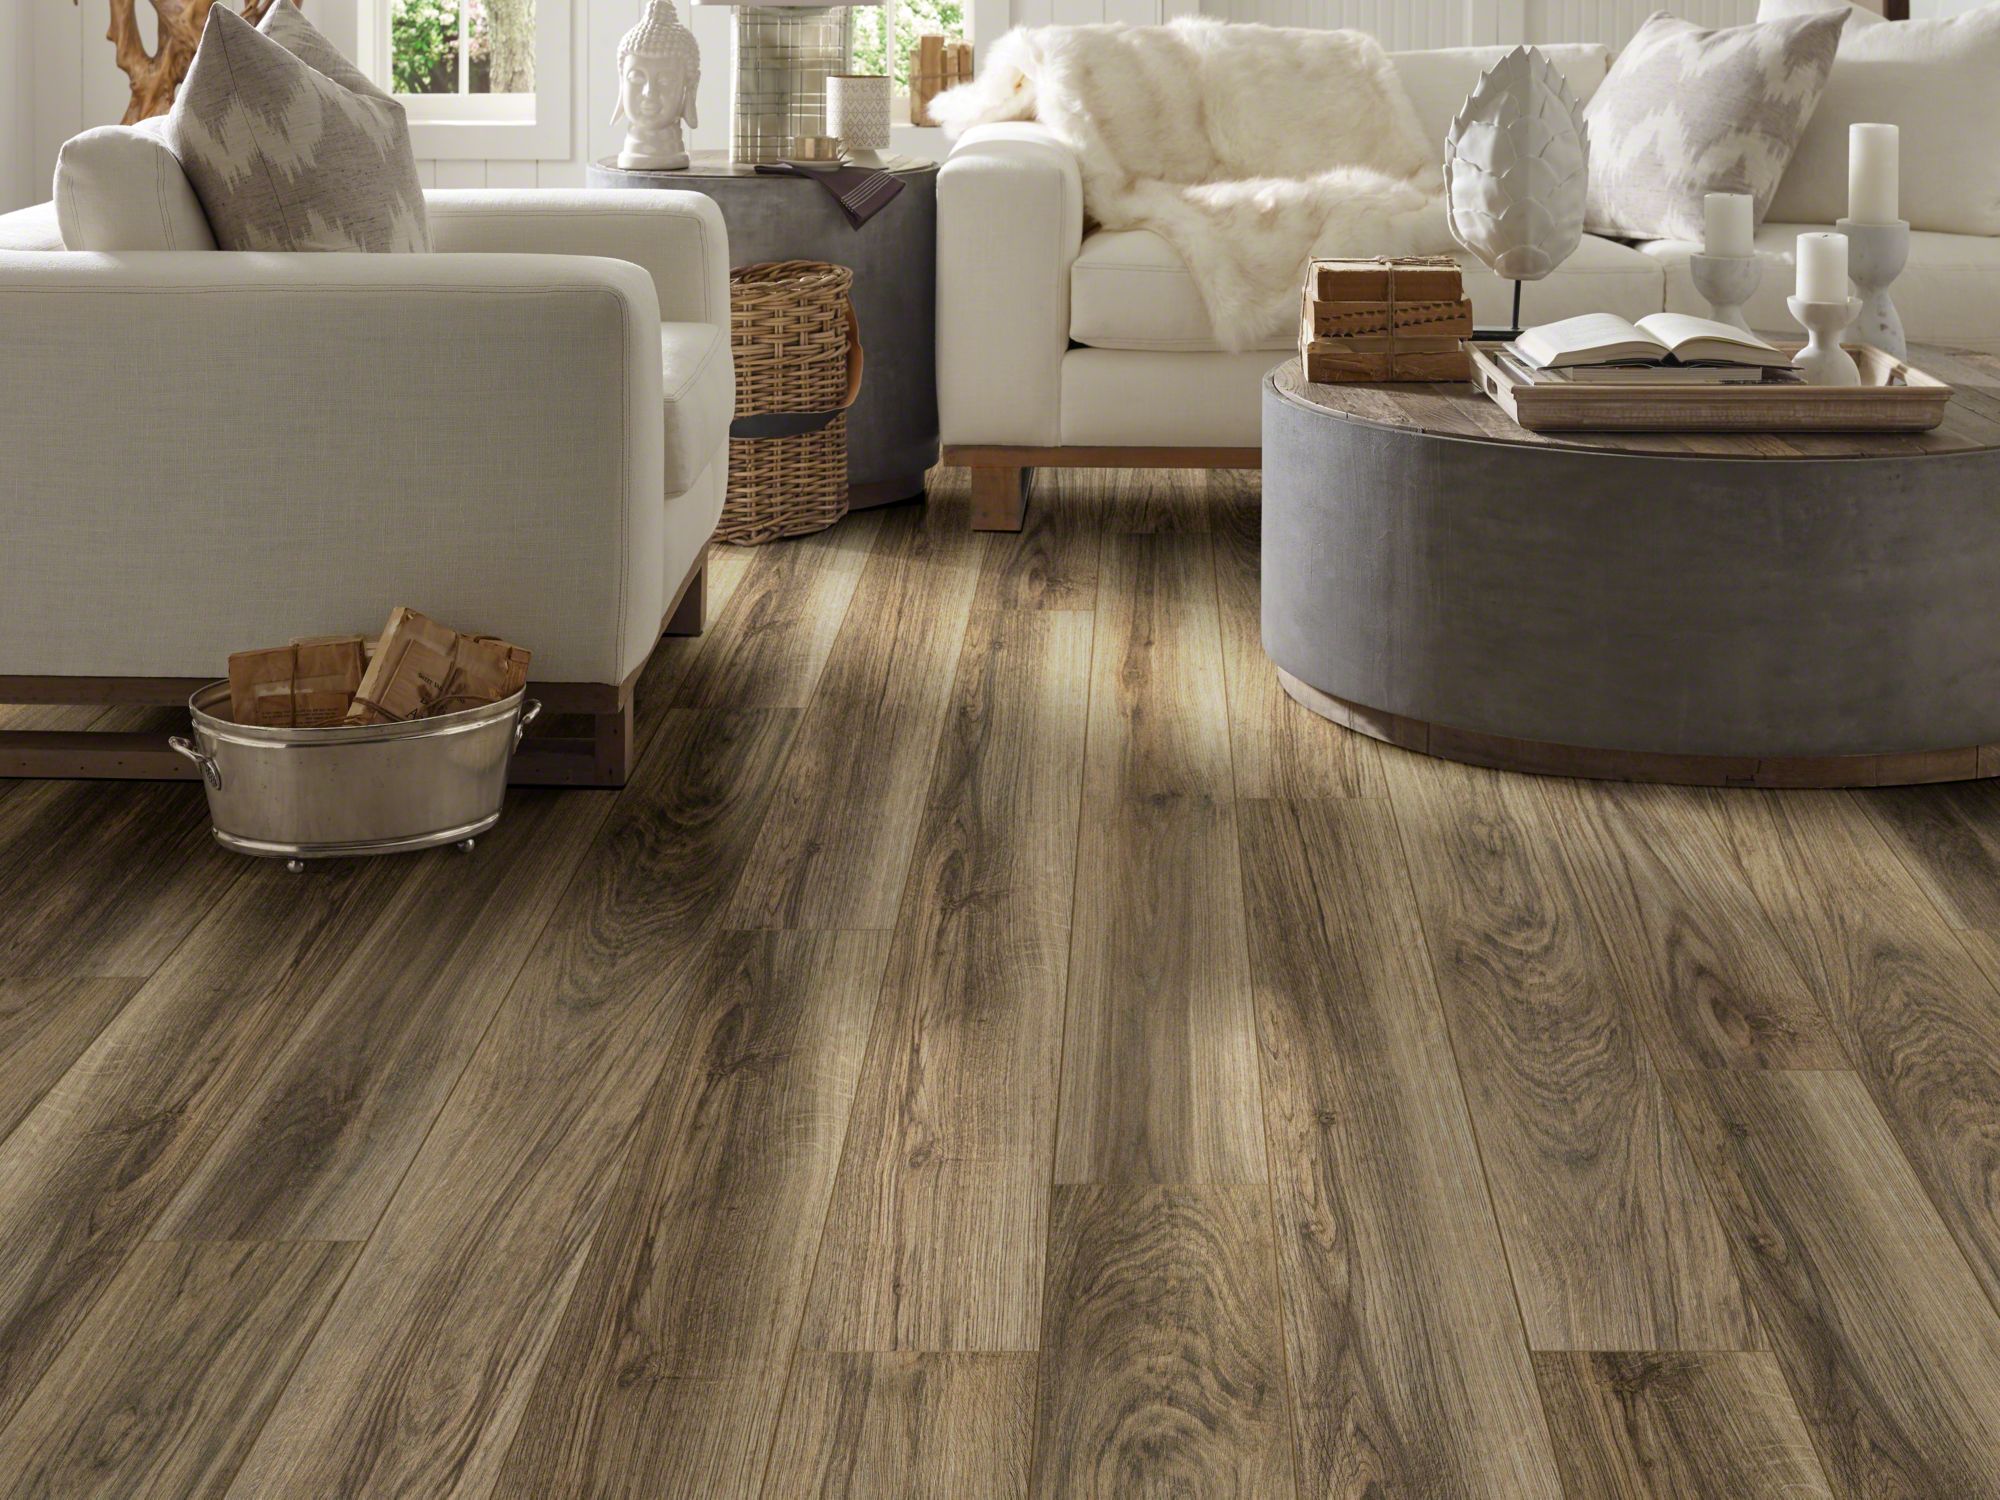 How flooring products can help protect and keep your floor around for many years